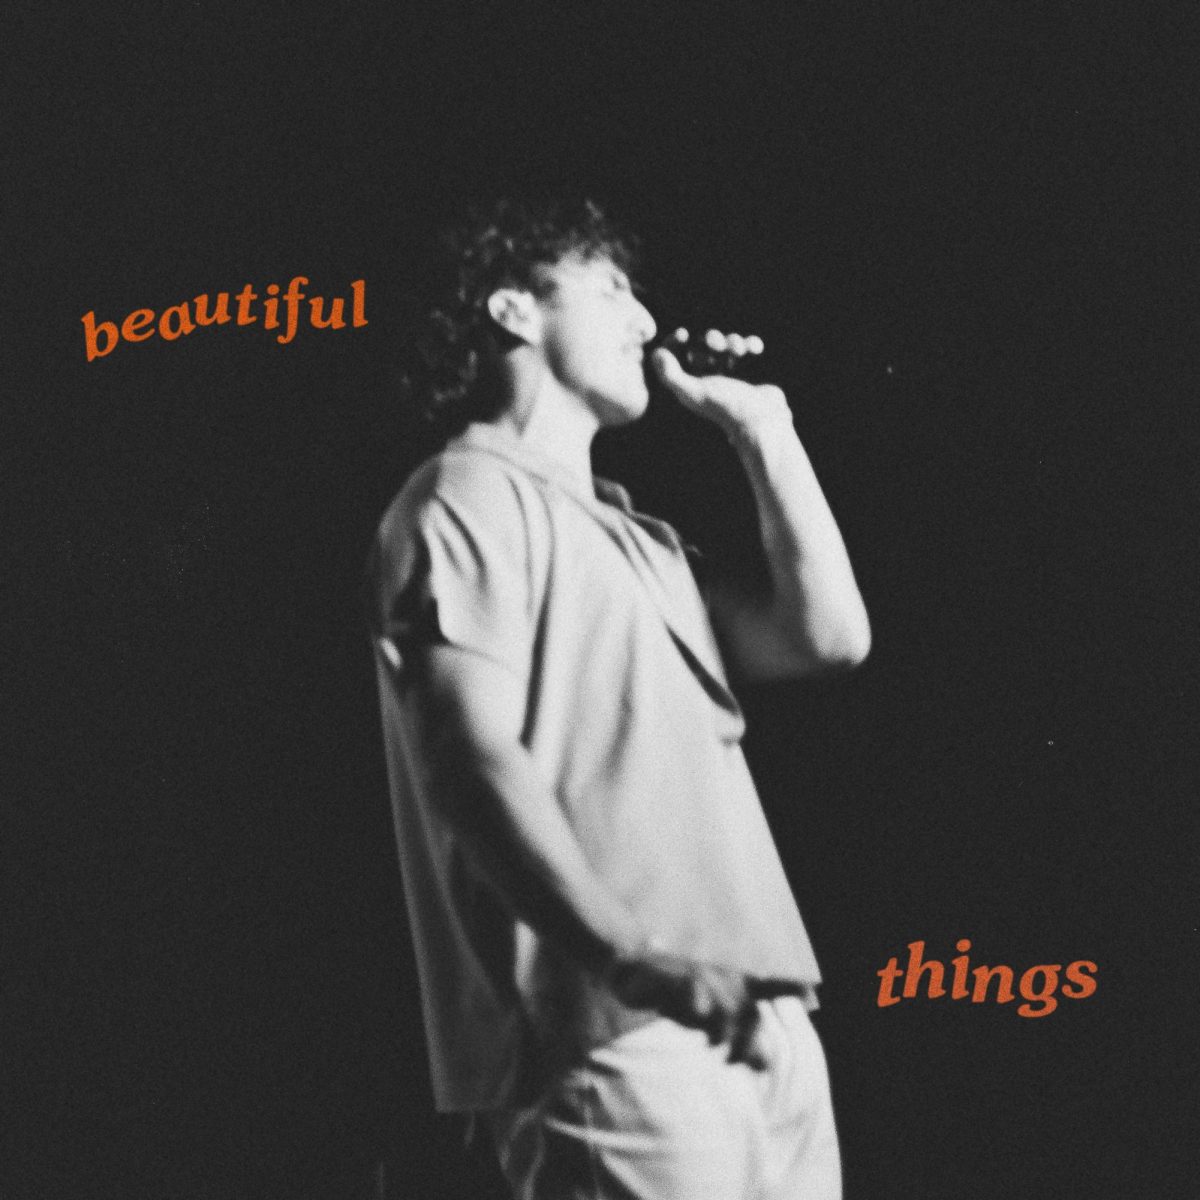 Benson Boone, who once auditioned for American Idol in 2021, releases pop folk-rock single “Beautiful Things,” a song about treasuring loved ones. It follows his November release, “To Love Someone.”